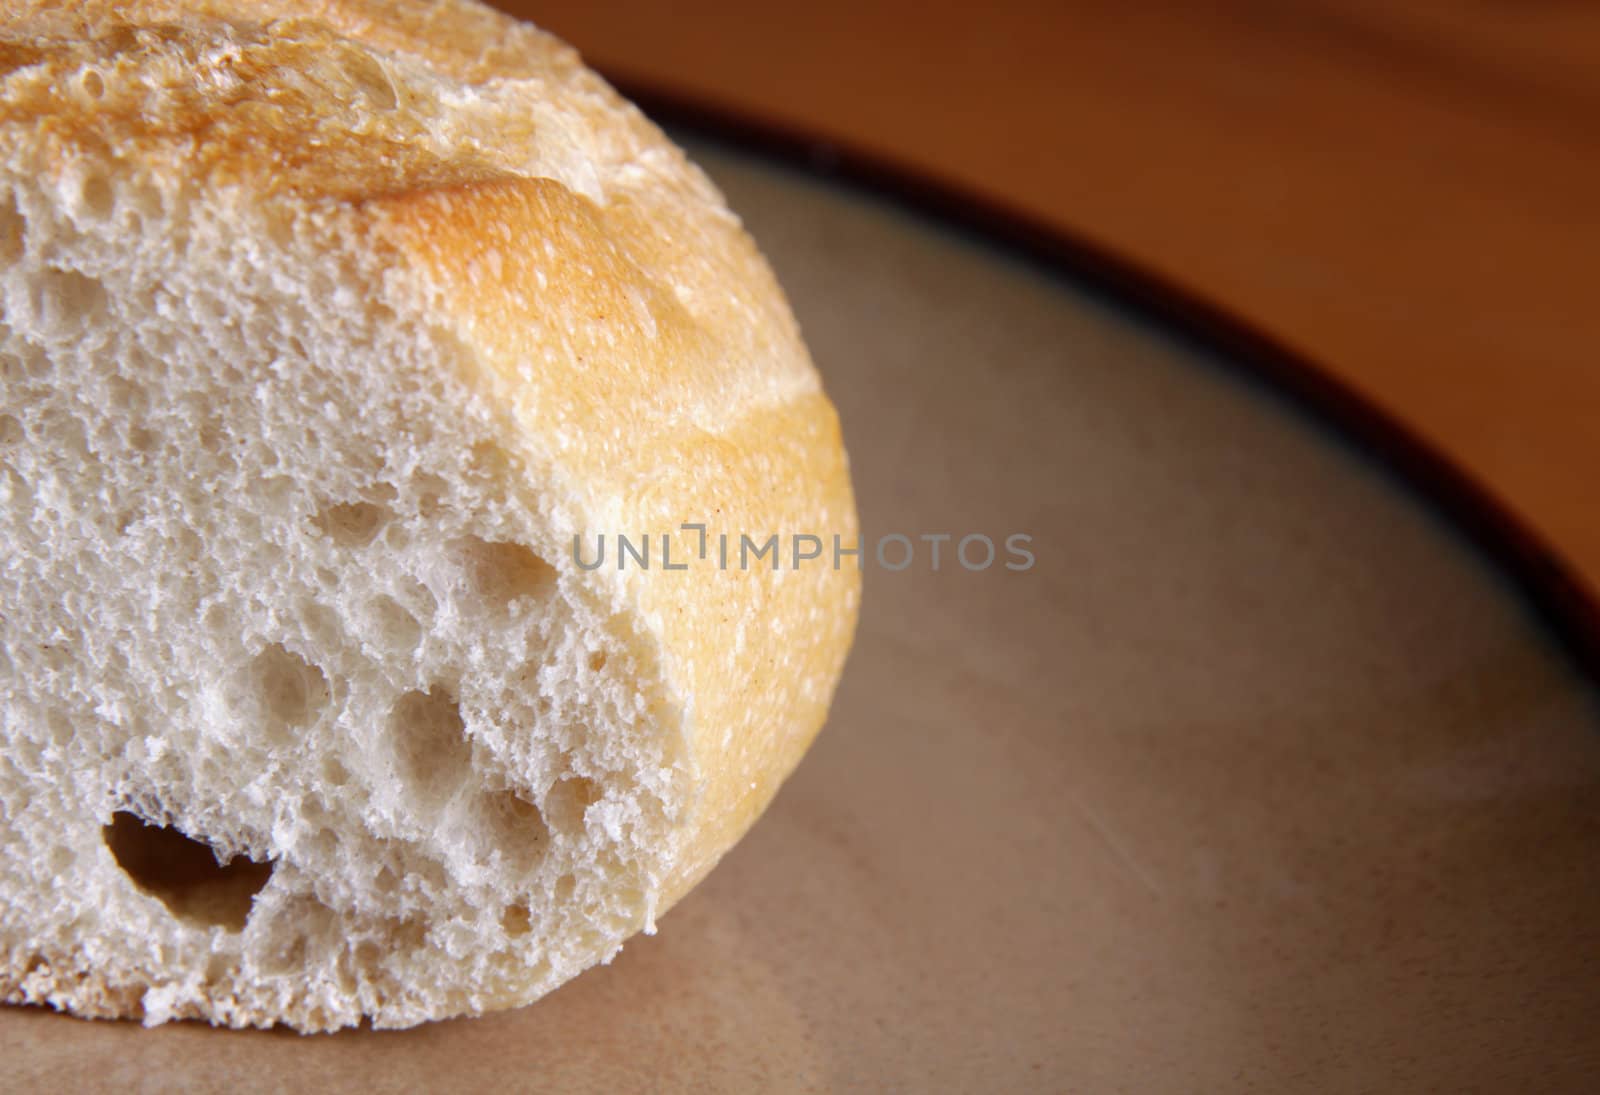 A close-up of a piece of bread sitting on a plate.